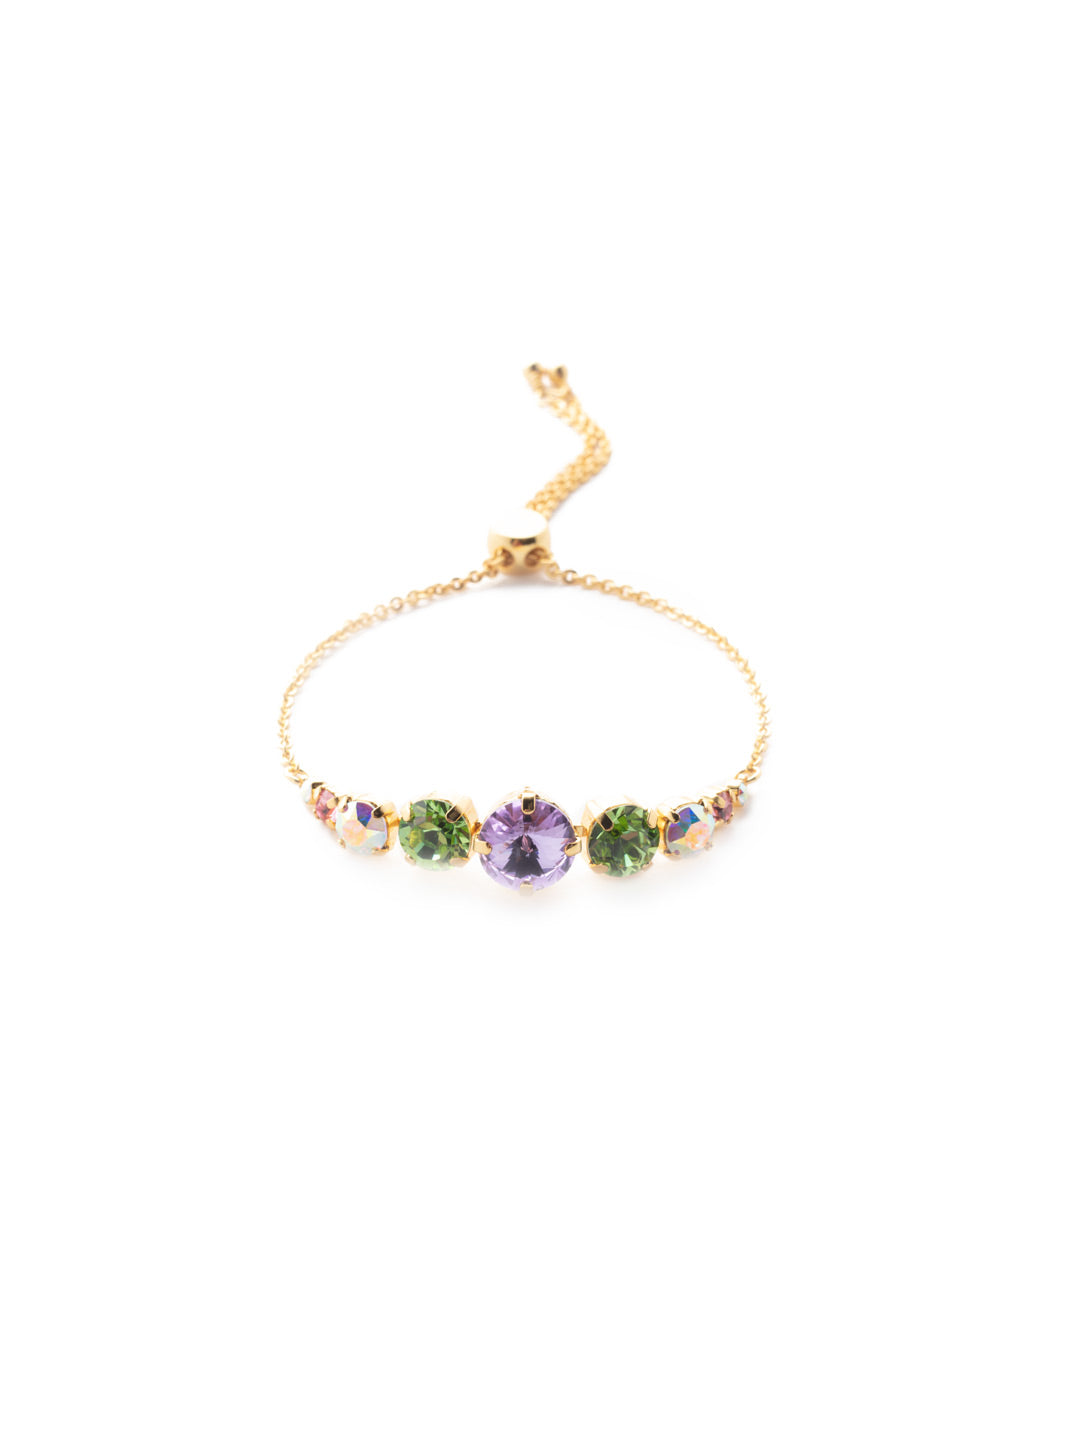 London Slider Bracelet - BCQ140BGSPR - <p>Slip on the London Slider Bracelet and adjust to your perfect fit. It's just the piece when you're looking to bling it on with some crystal sparkle. From Sorrelli's Spring Rain collection in our Bright Gold-tone finish.</p>